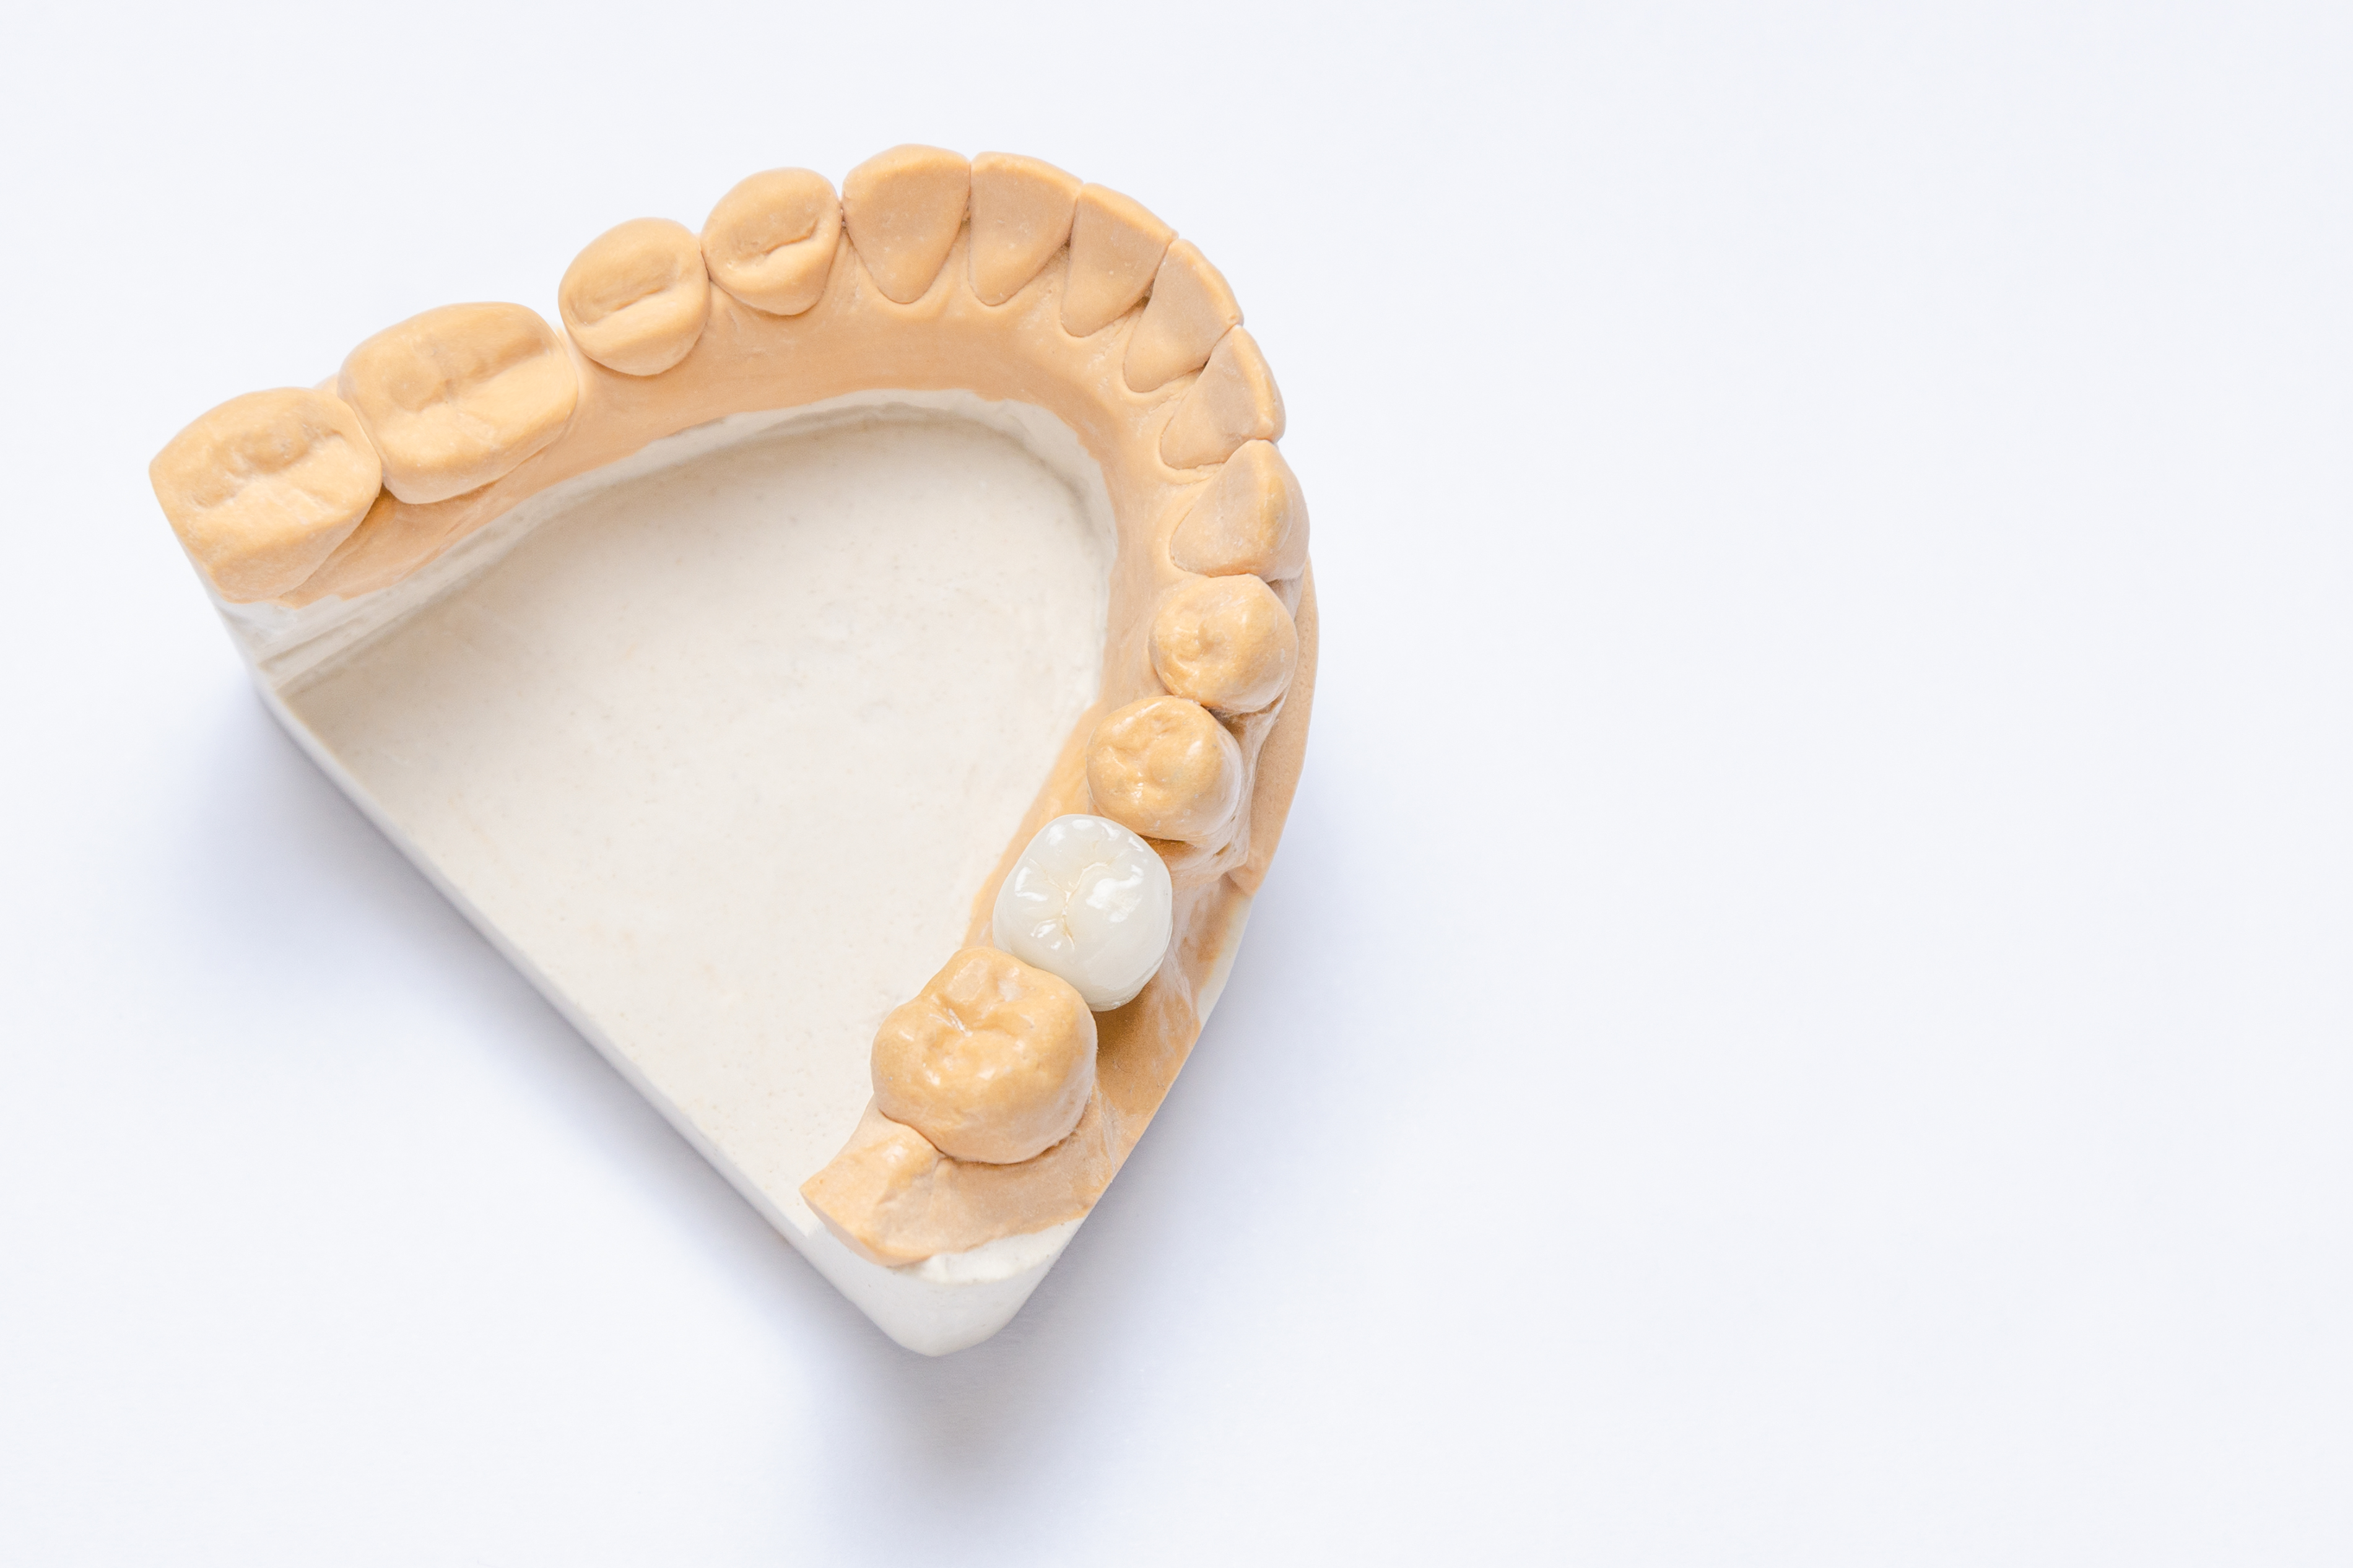 on a white background is a plaster model of the lower jaw with a ceramic crown made on a dental implant. dental prosthetics concept. crown making